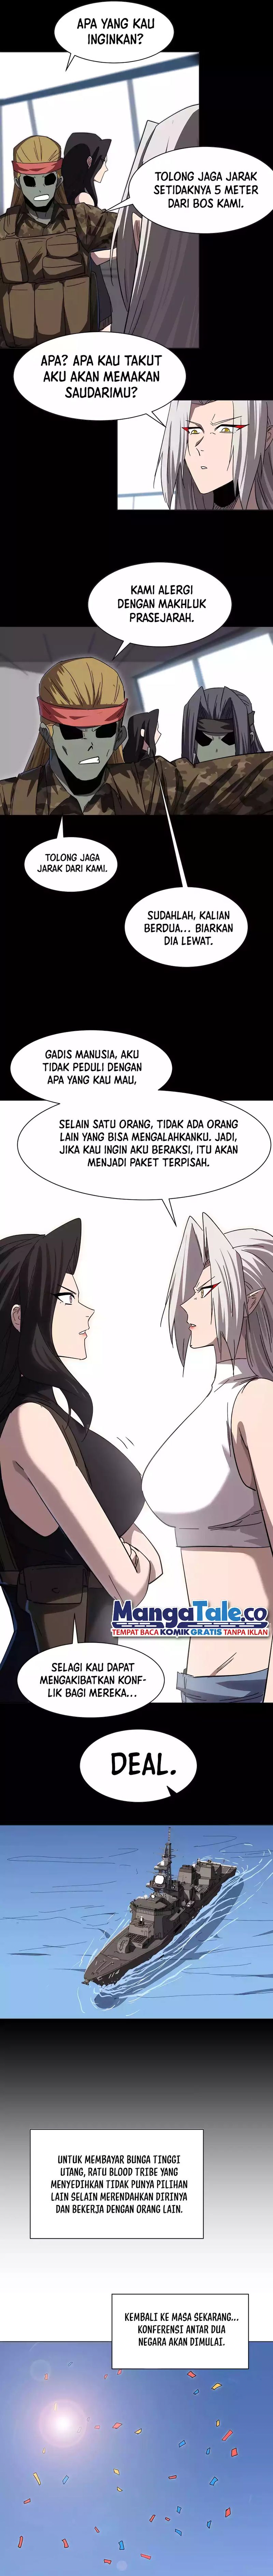 Mr. Zombie Chapter 96 Image 2